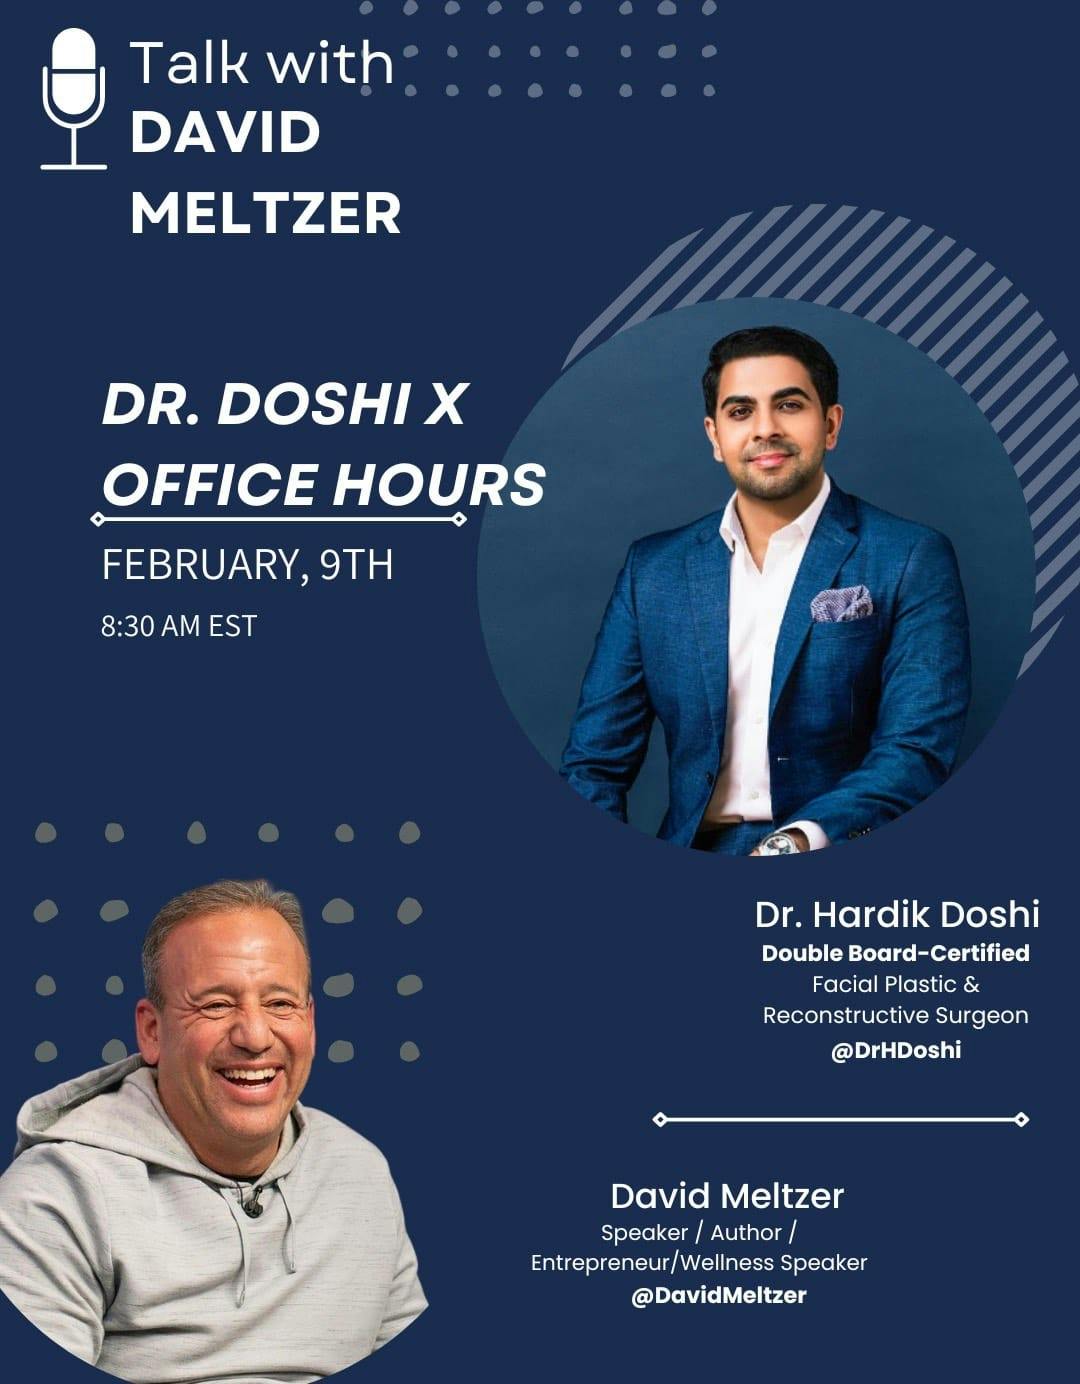 Dr. Doshi X Office Hours